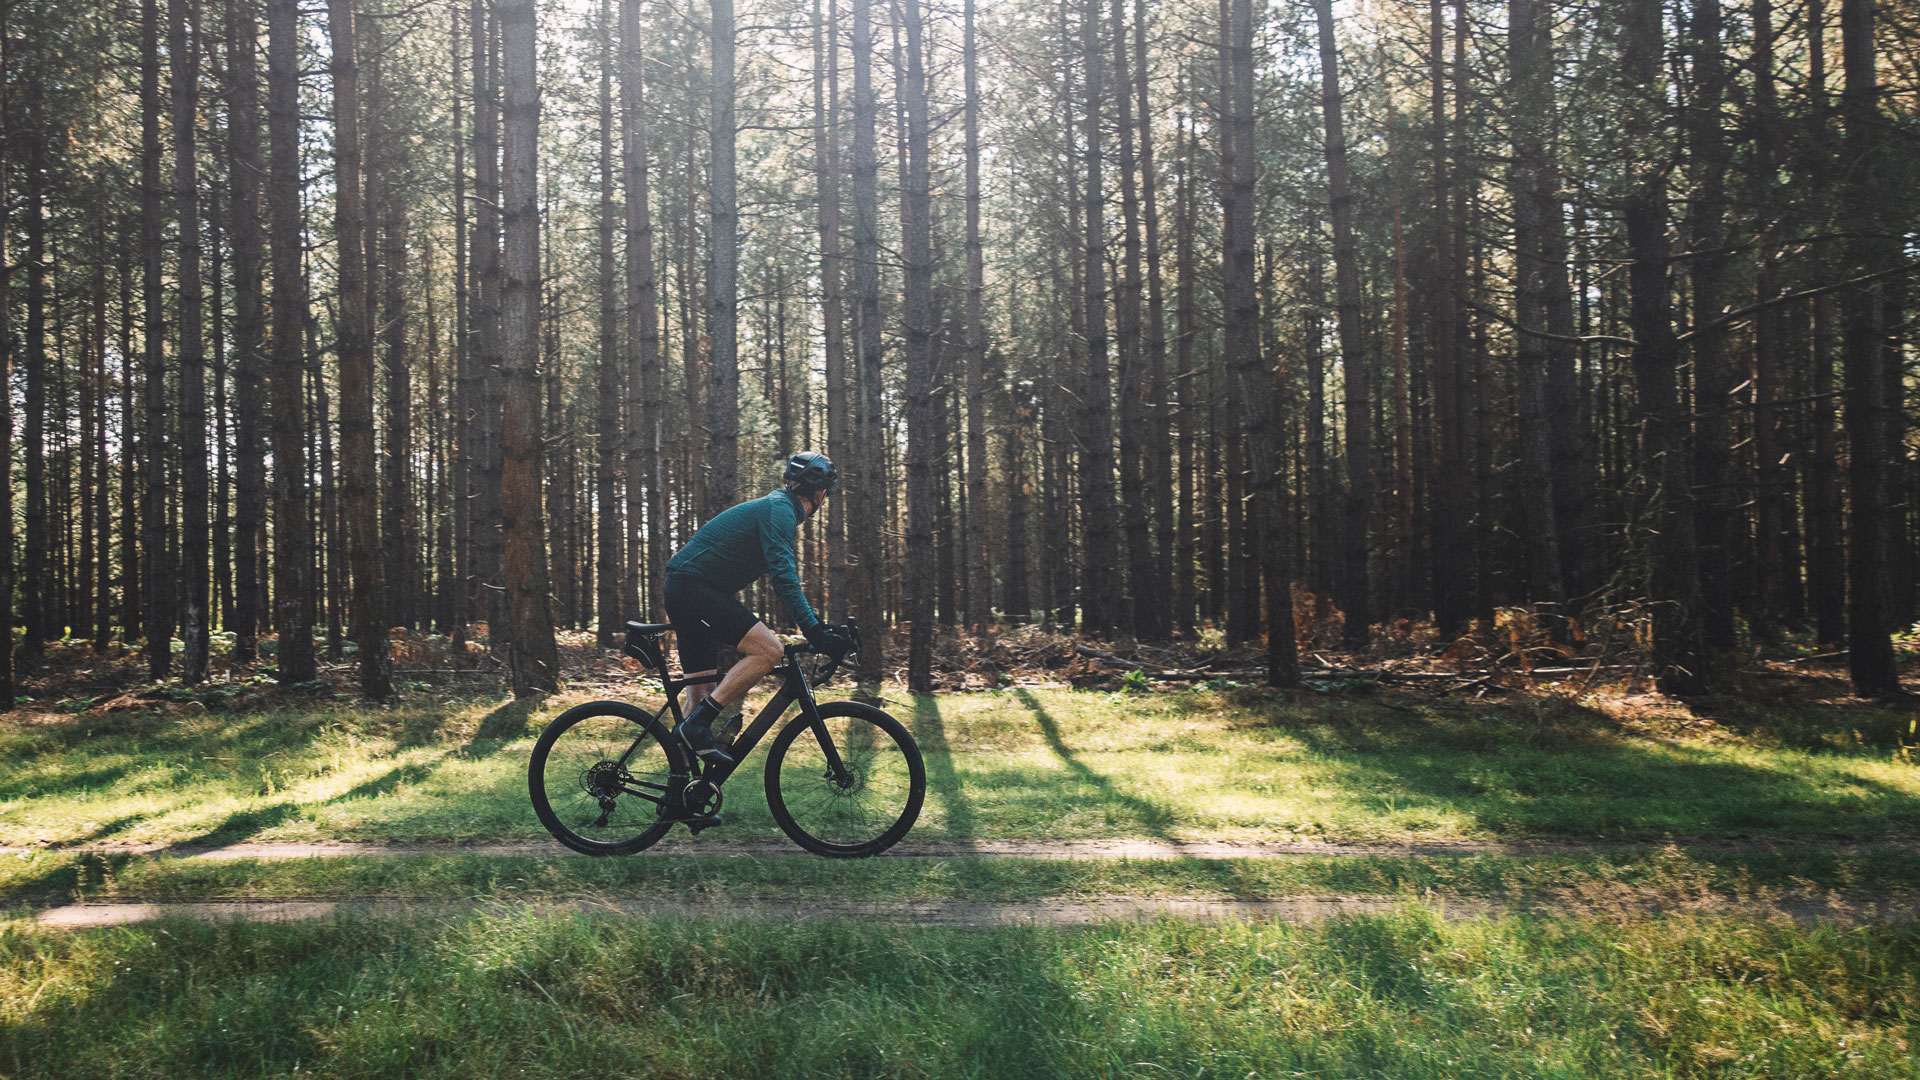 A man riding a bicycle through the forest